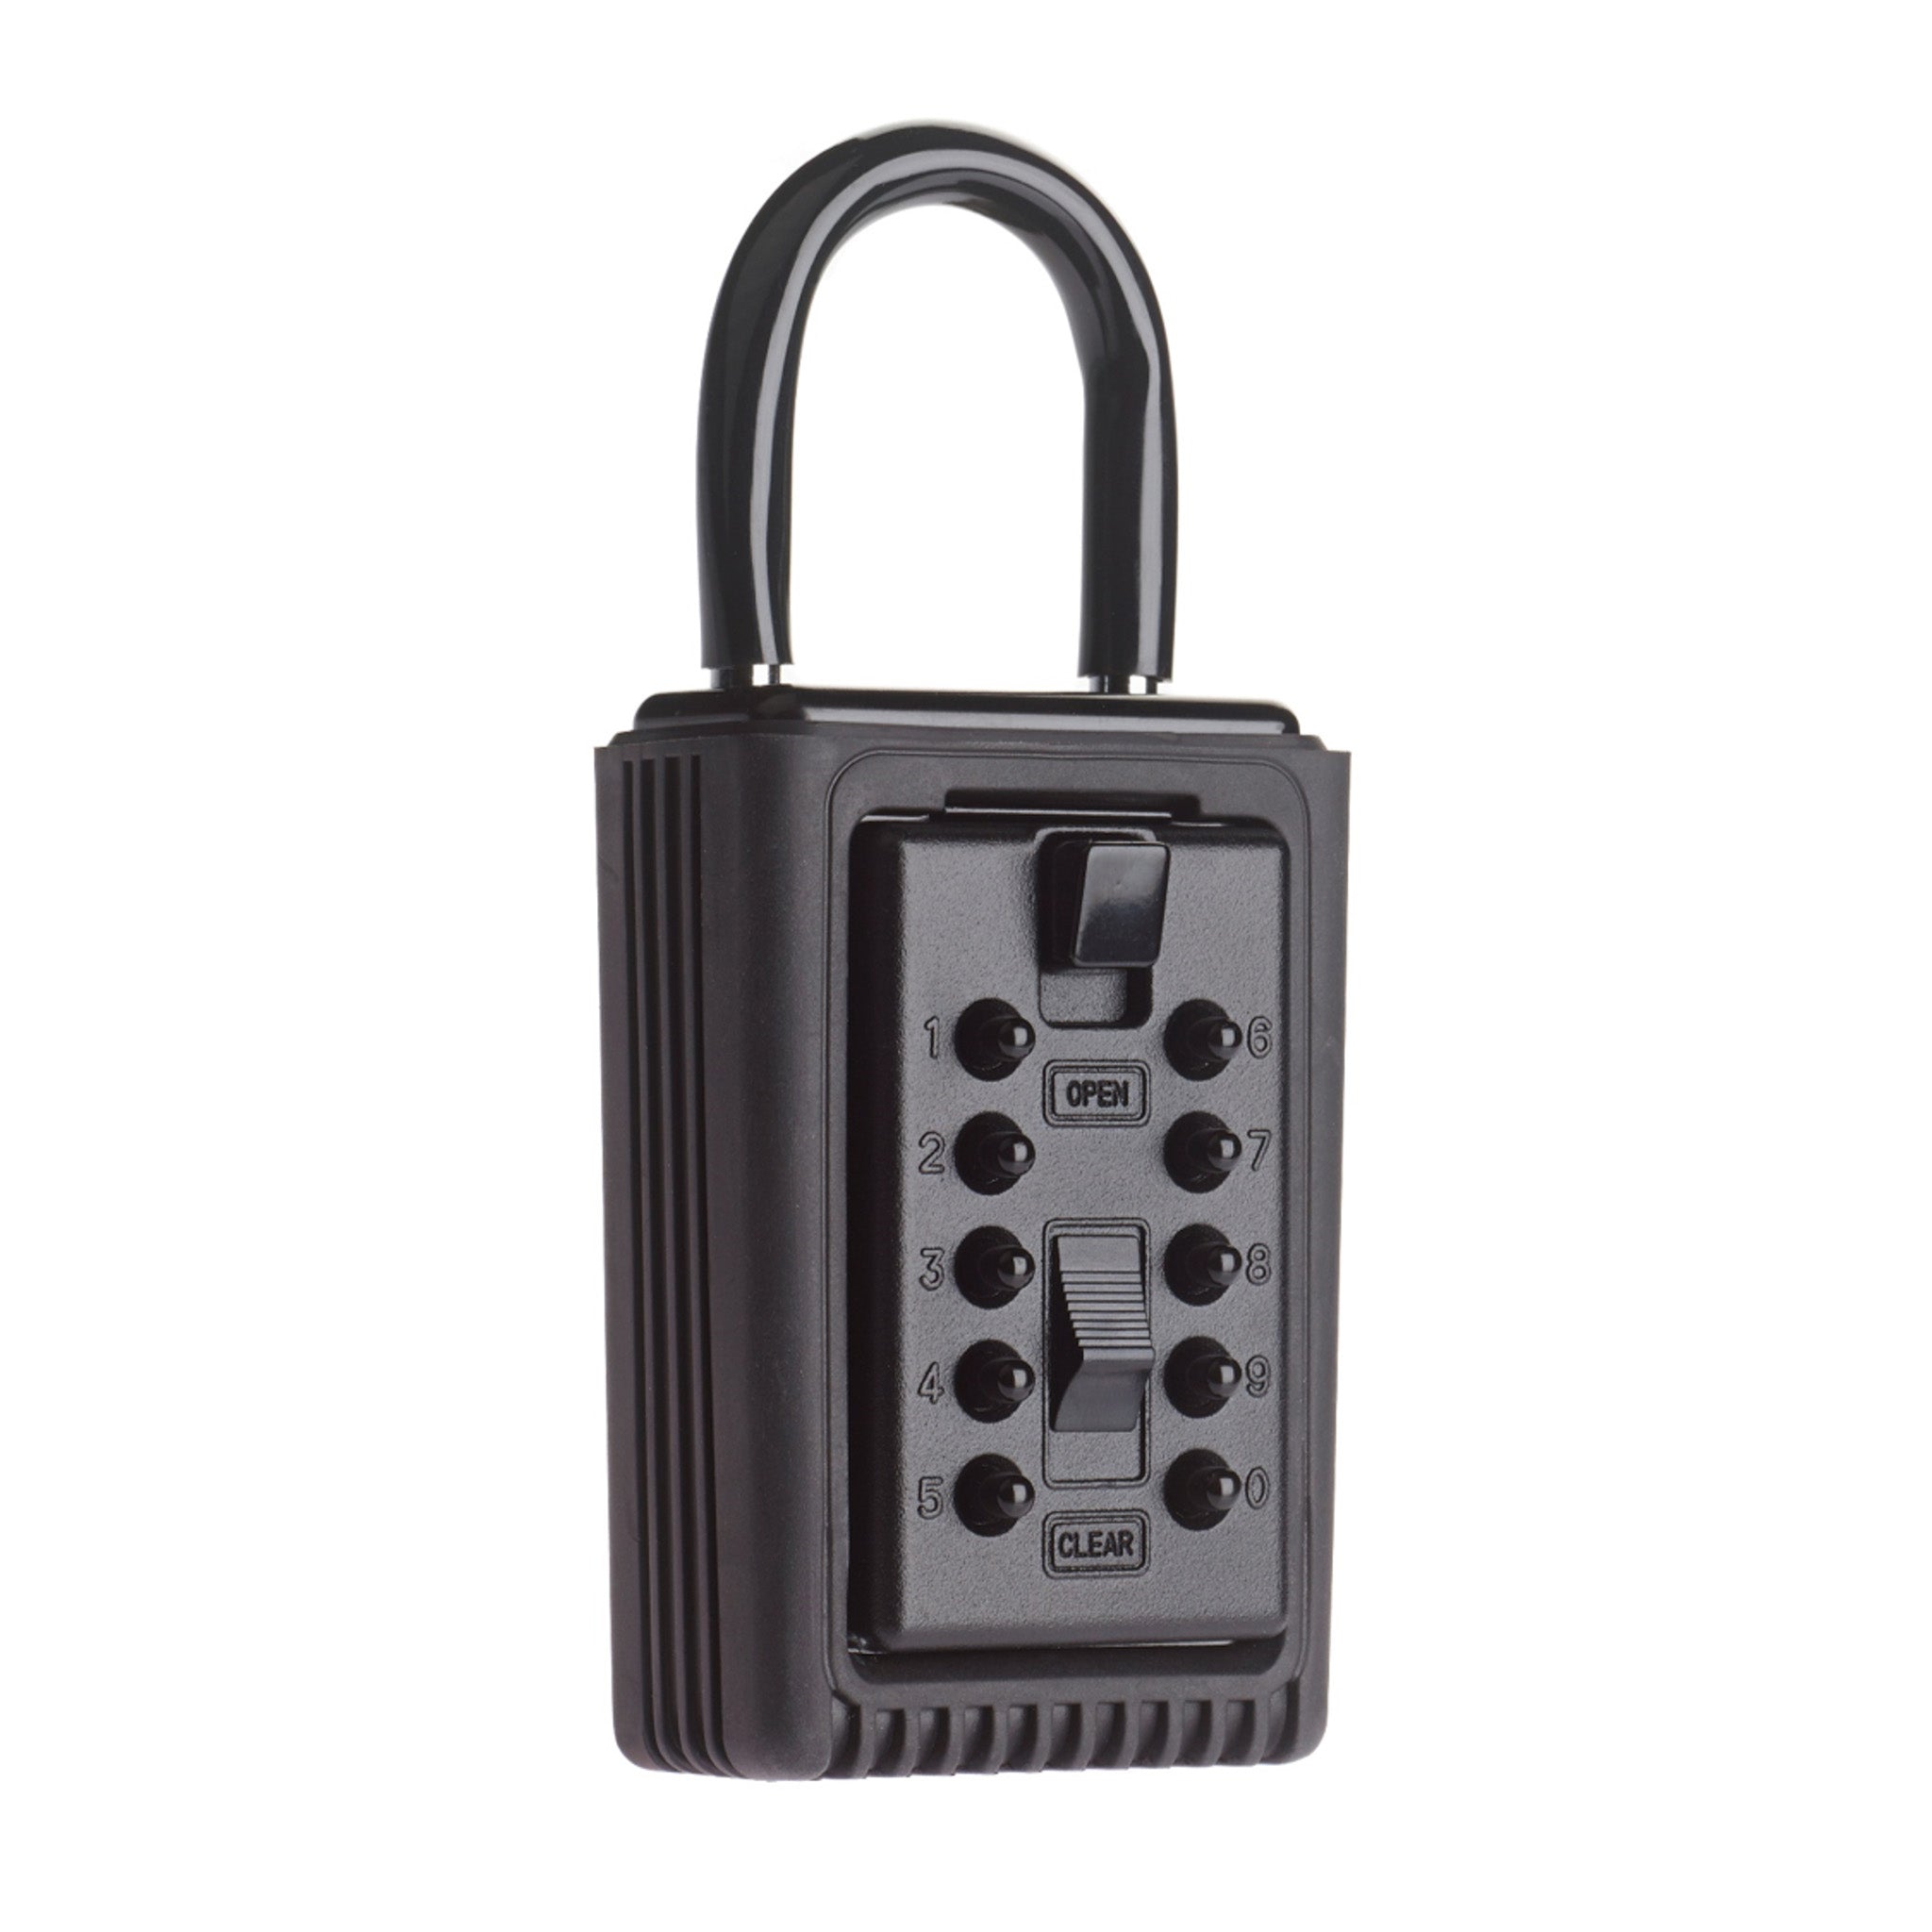 Supra Portable key safe with shackle for temporary access